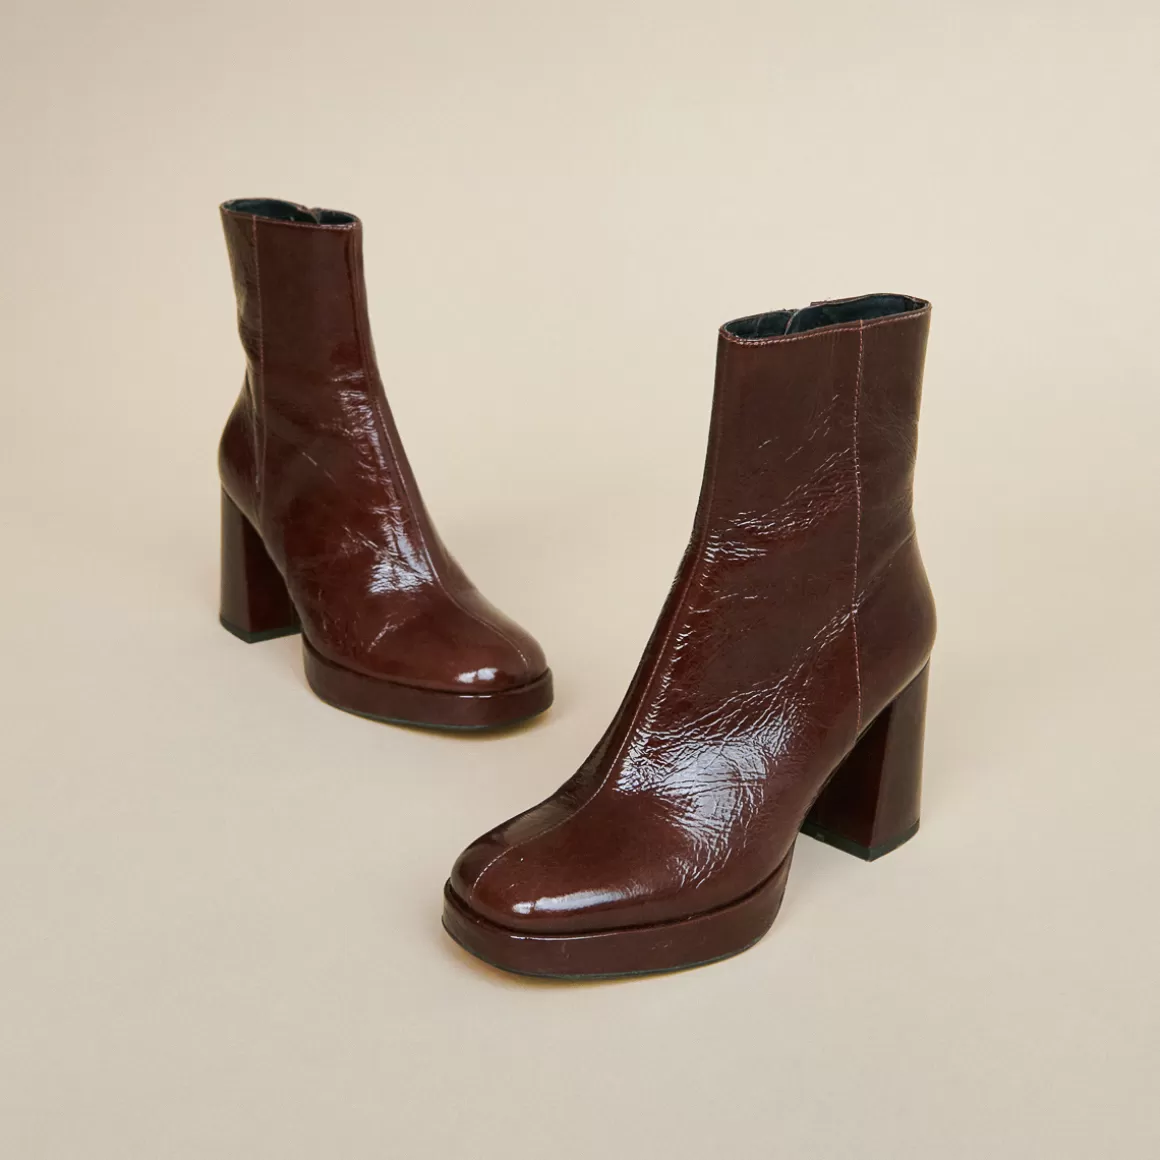 Platform boots with square toes<Jonak Best